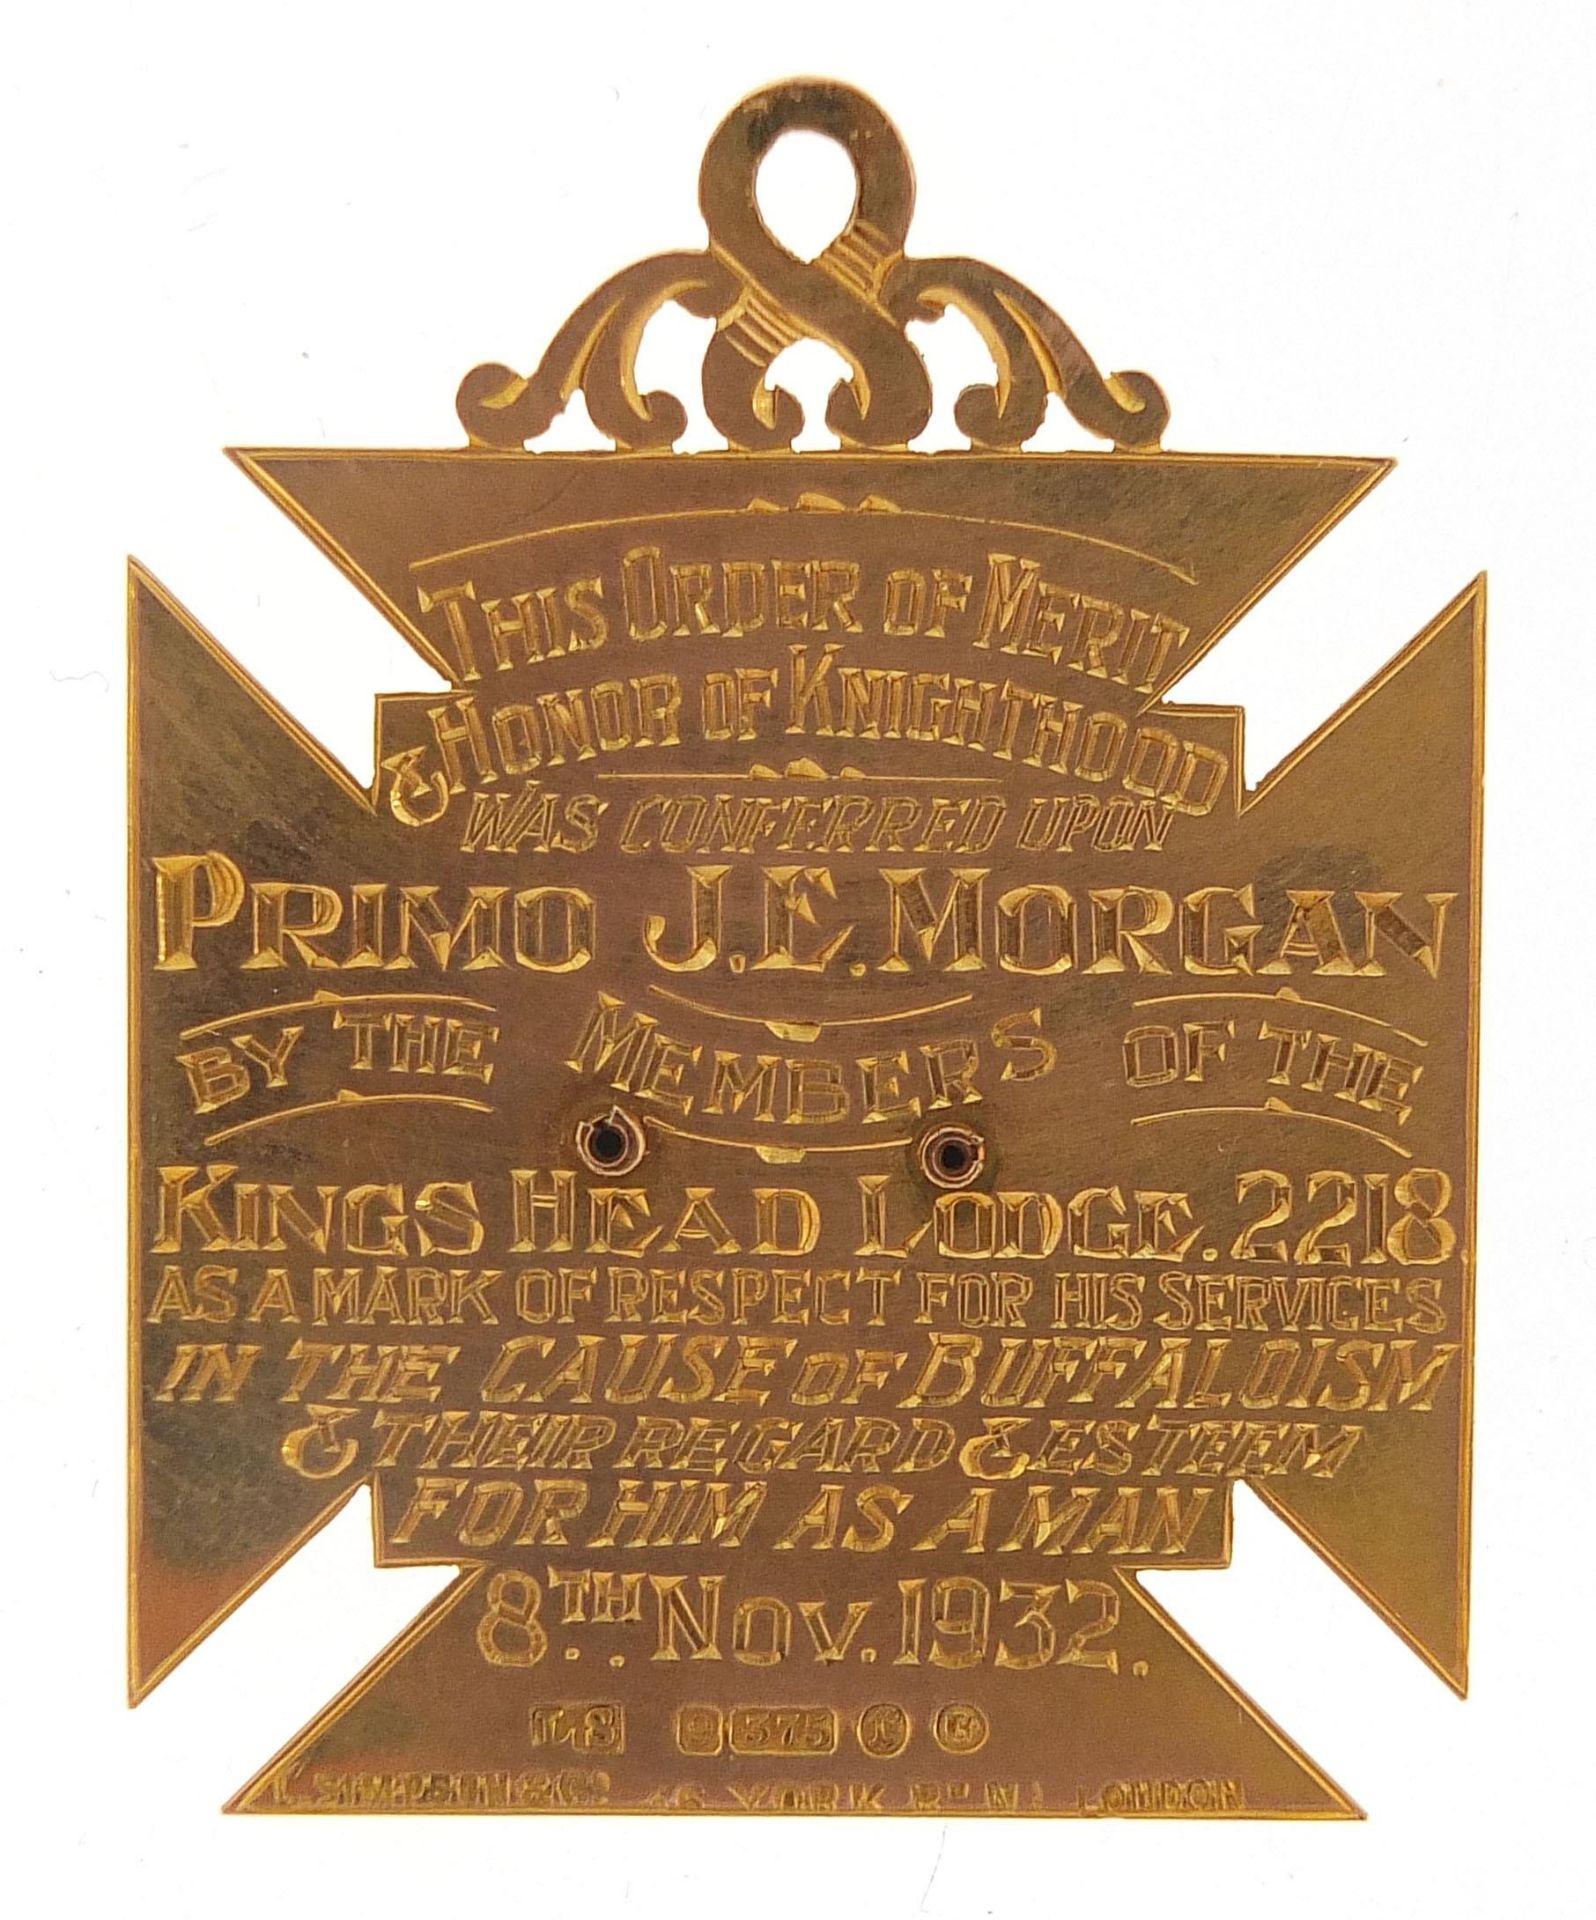 9ct gold and enamel RAOB medal awarded to Primo J.E. Morgan by The King's Head Lodge, 5cm high, 16. - Image 2 of 3